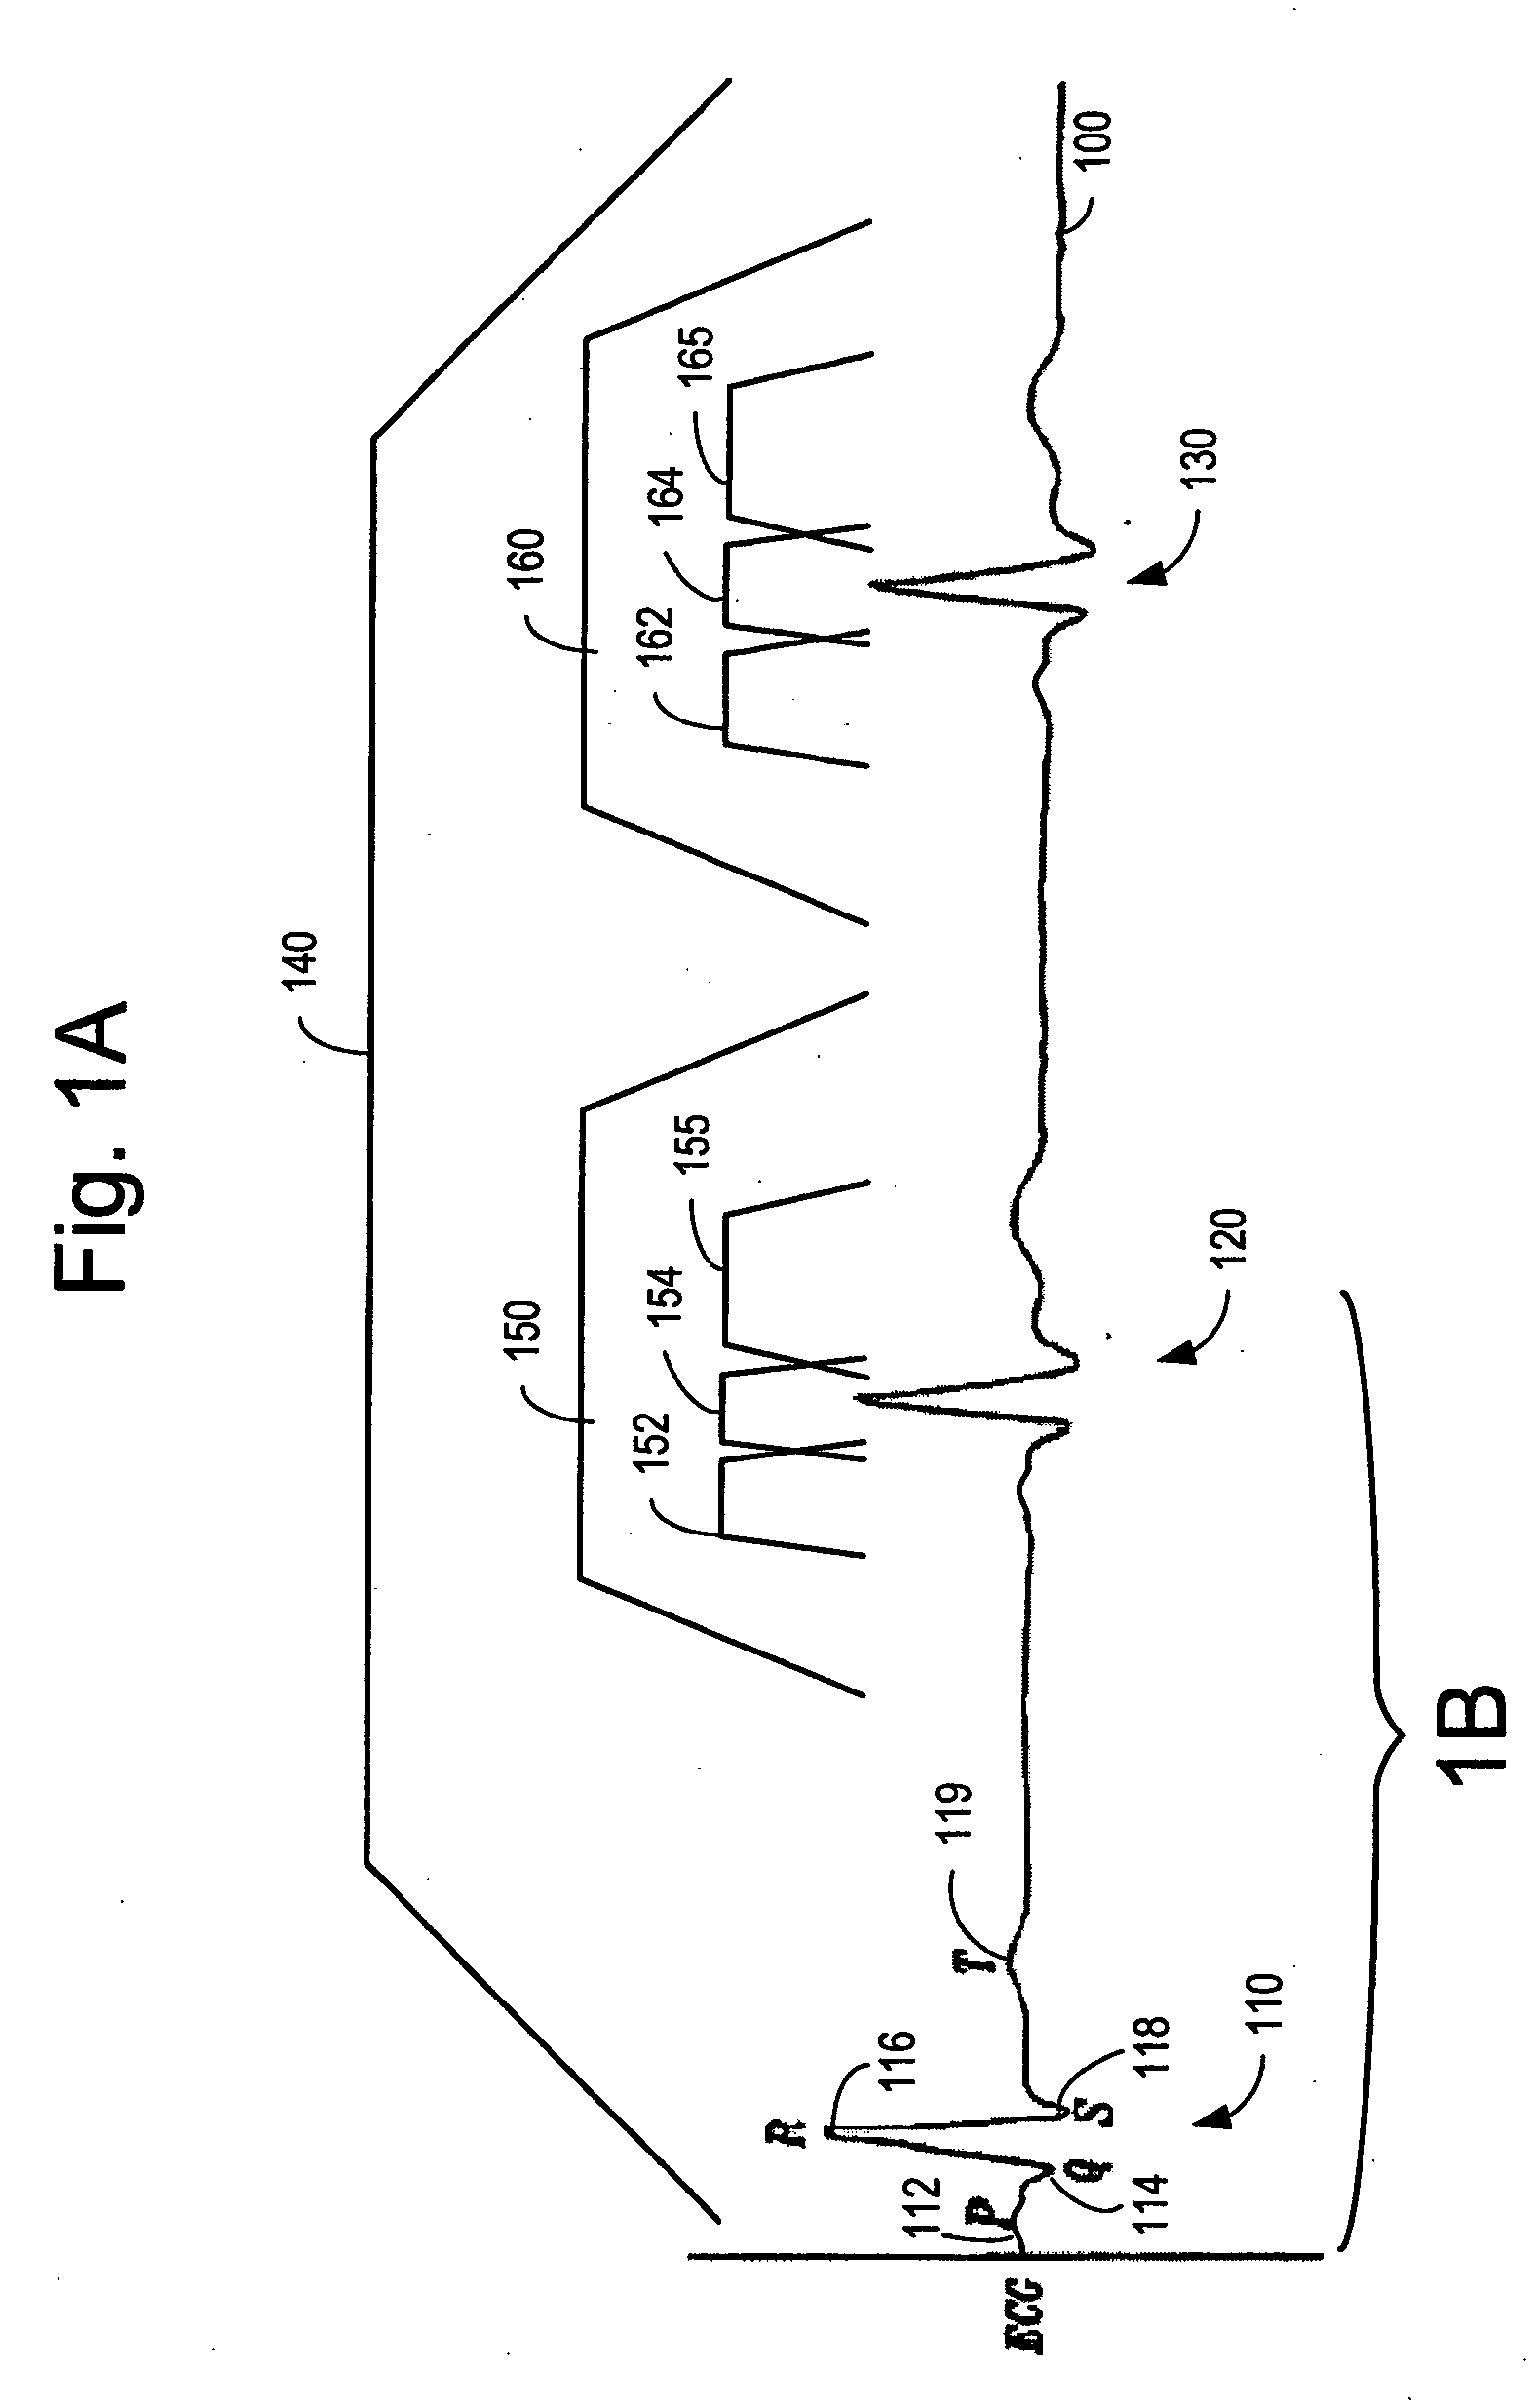 Closed loop cardiac resynchronization therapy using cardiac activation sequence information